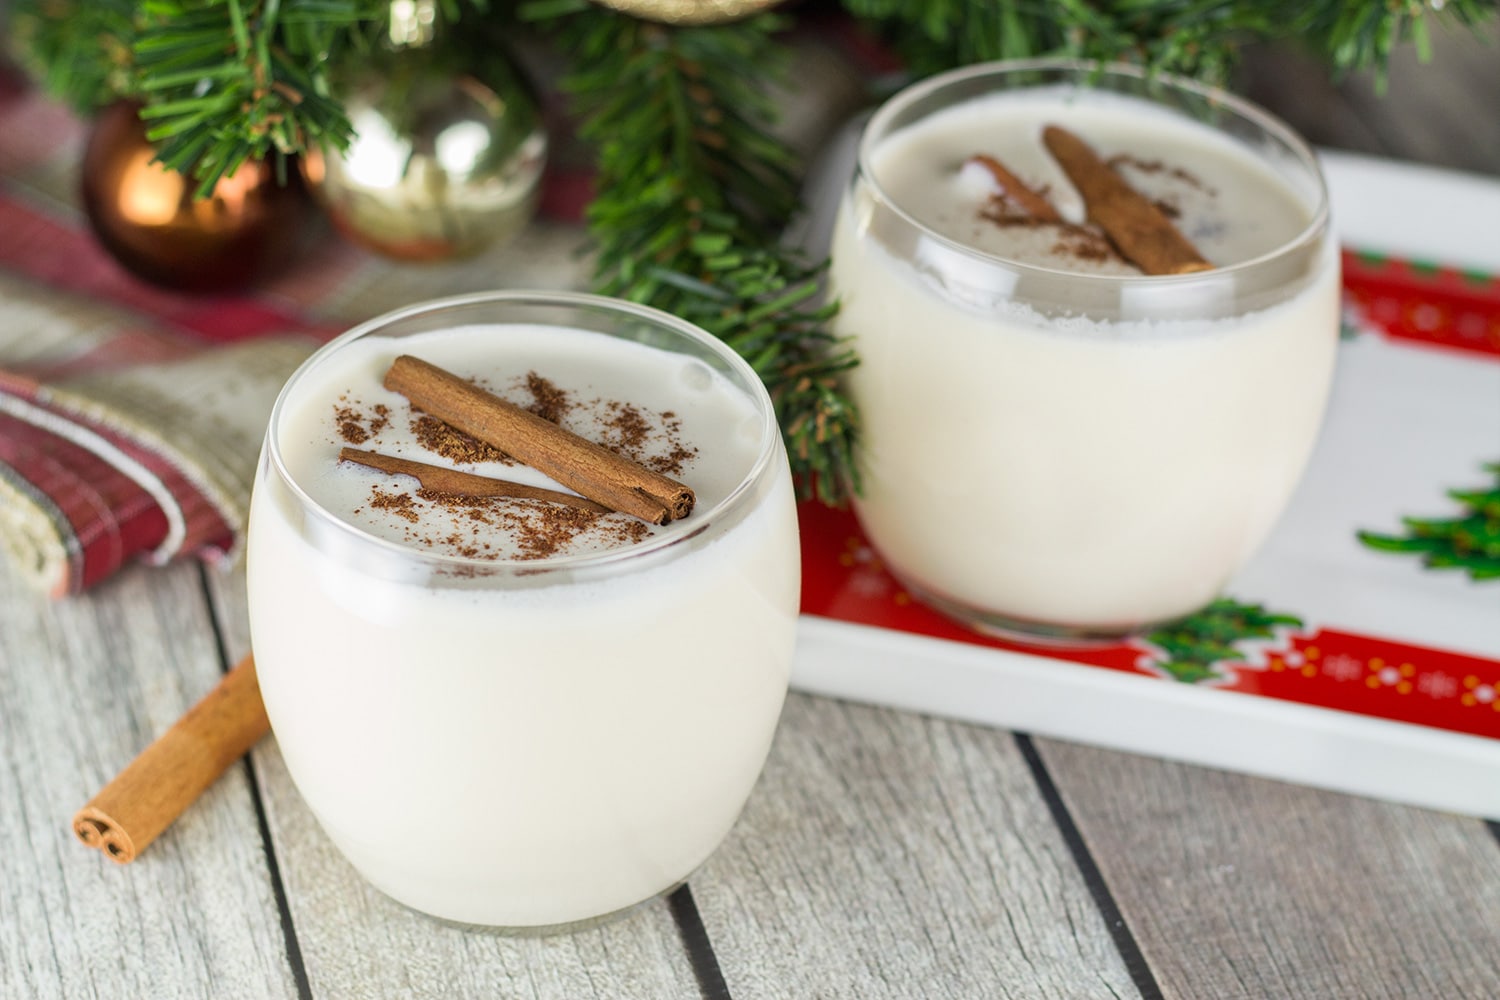 Learn how to make Coquito (Puerto Rican Eggnog) at home and make your Christmas or any other holiday unforgettable. Rich, creamy, boozy! | cookingtheglobe.com